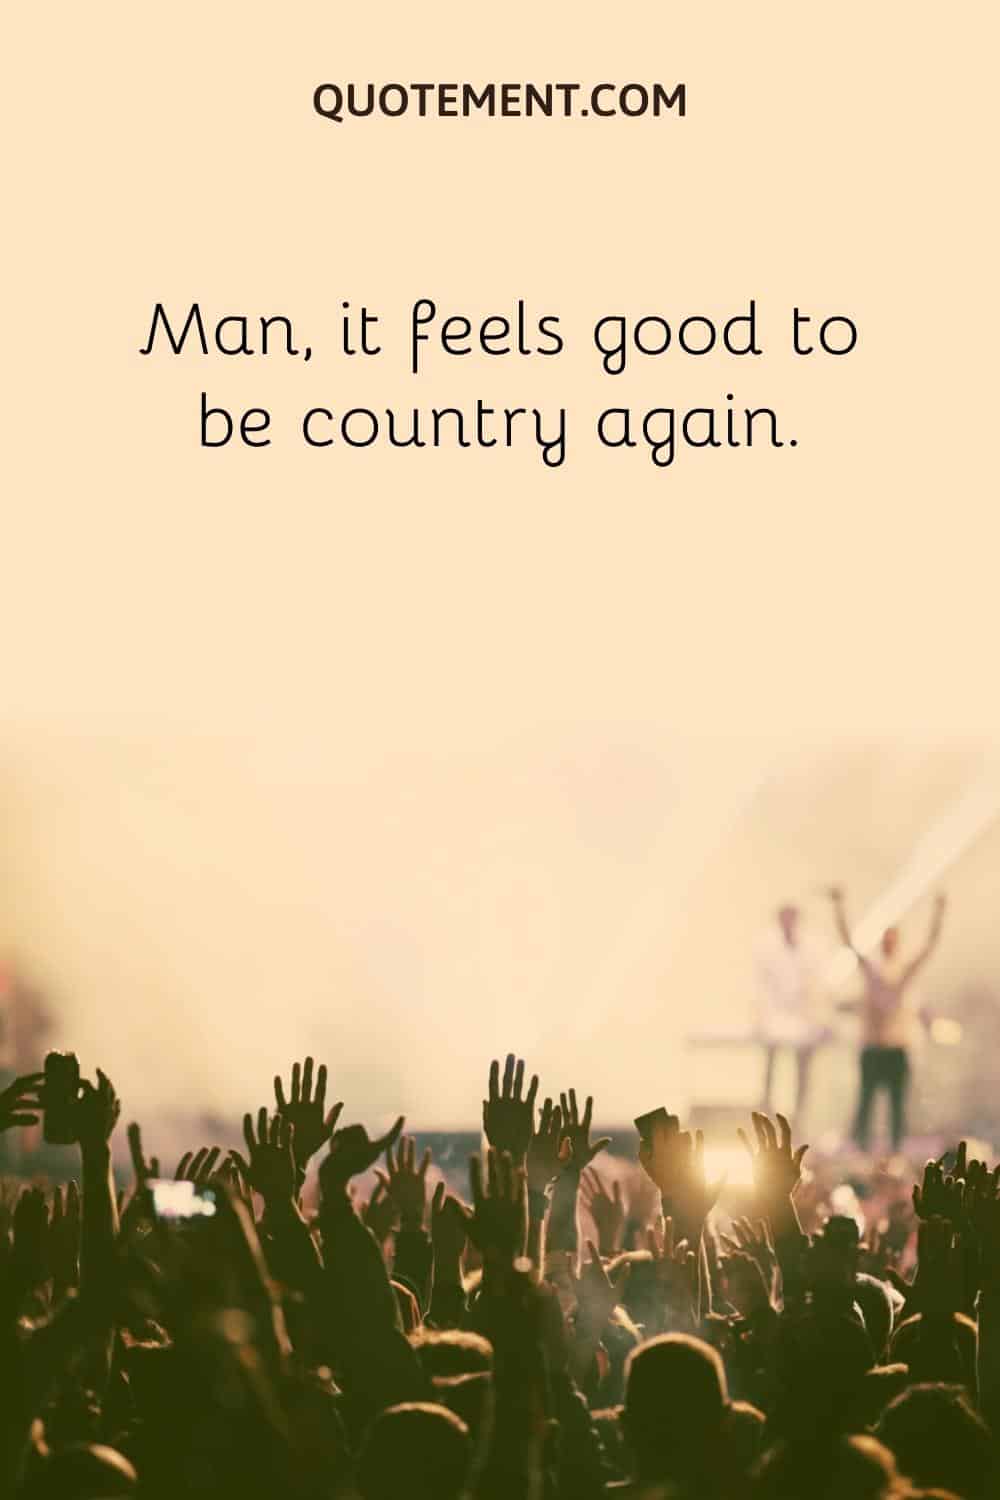 Man, it feels good to be country again